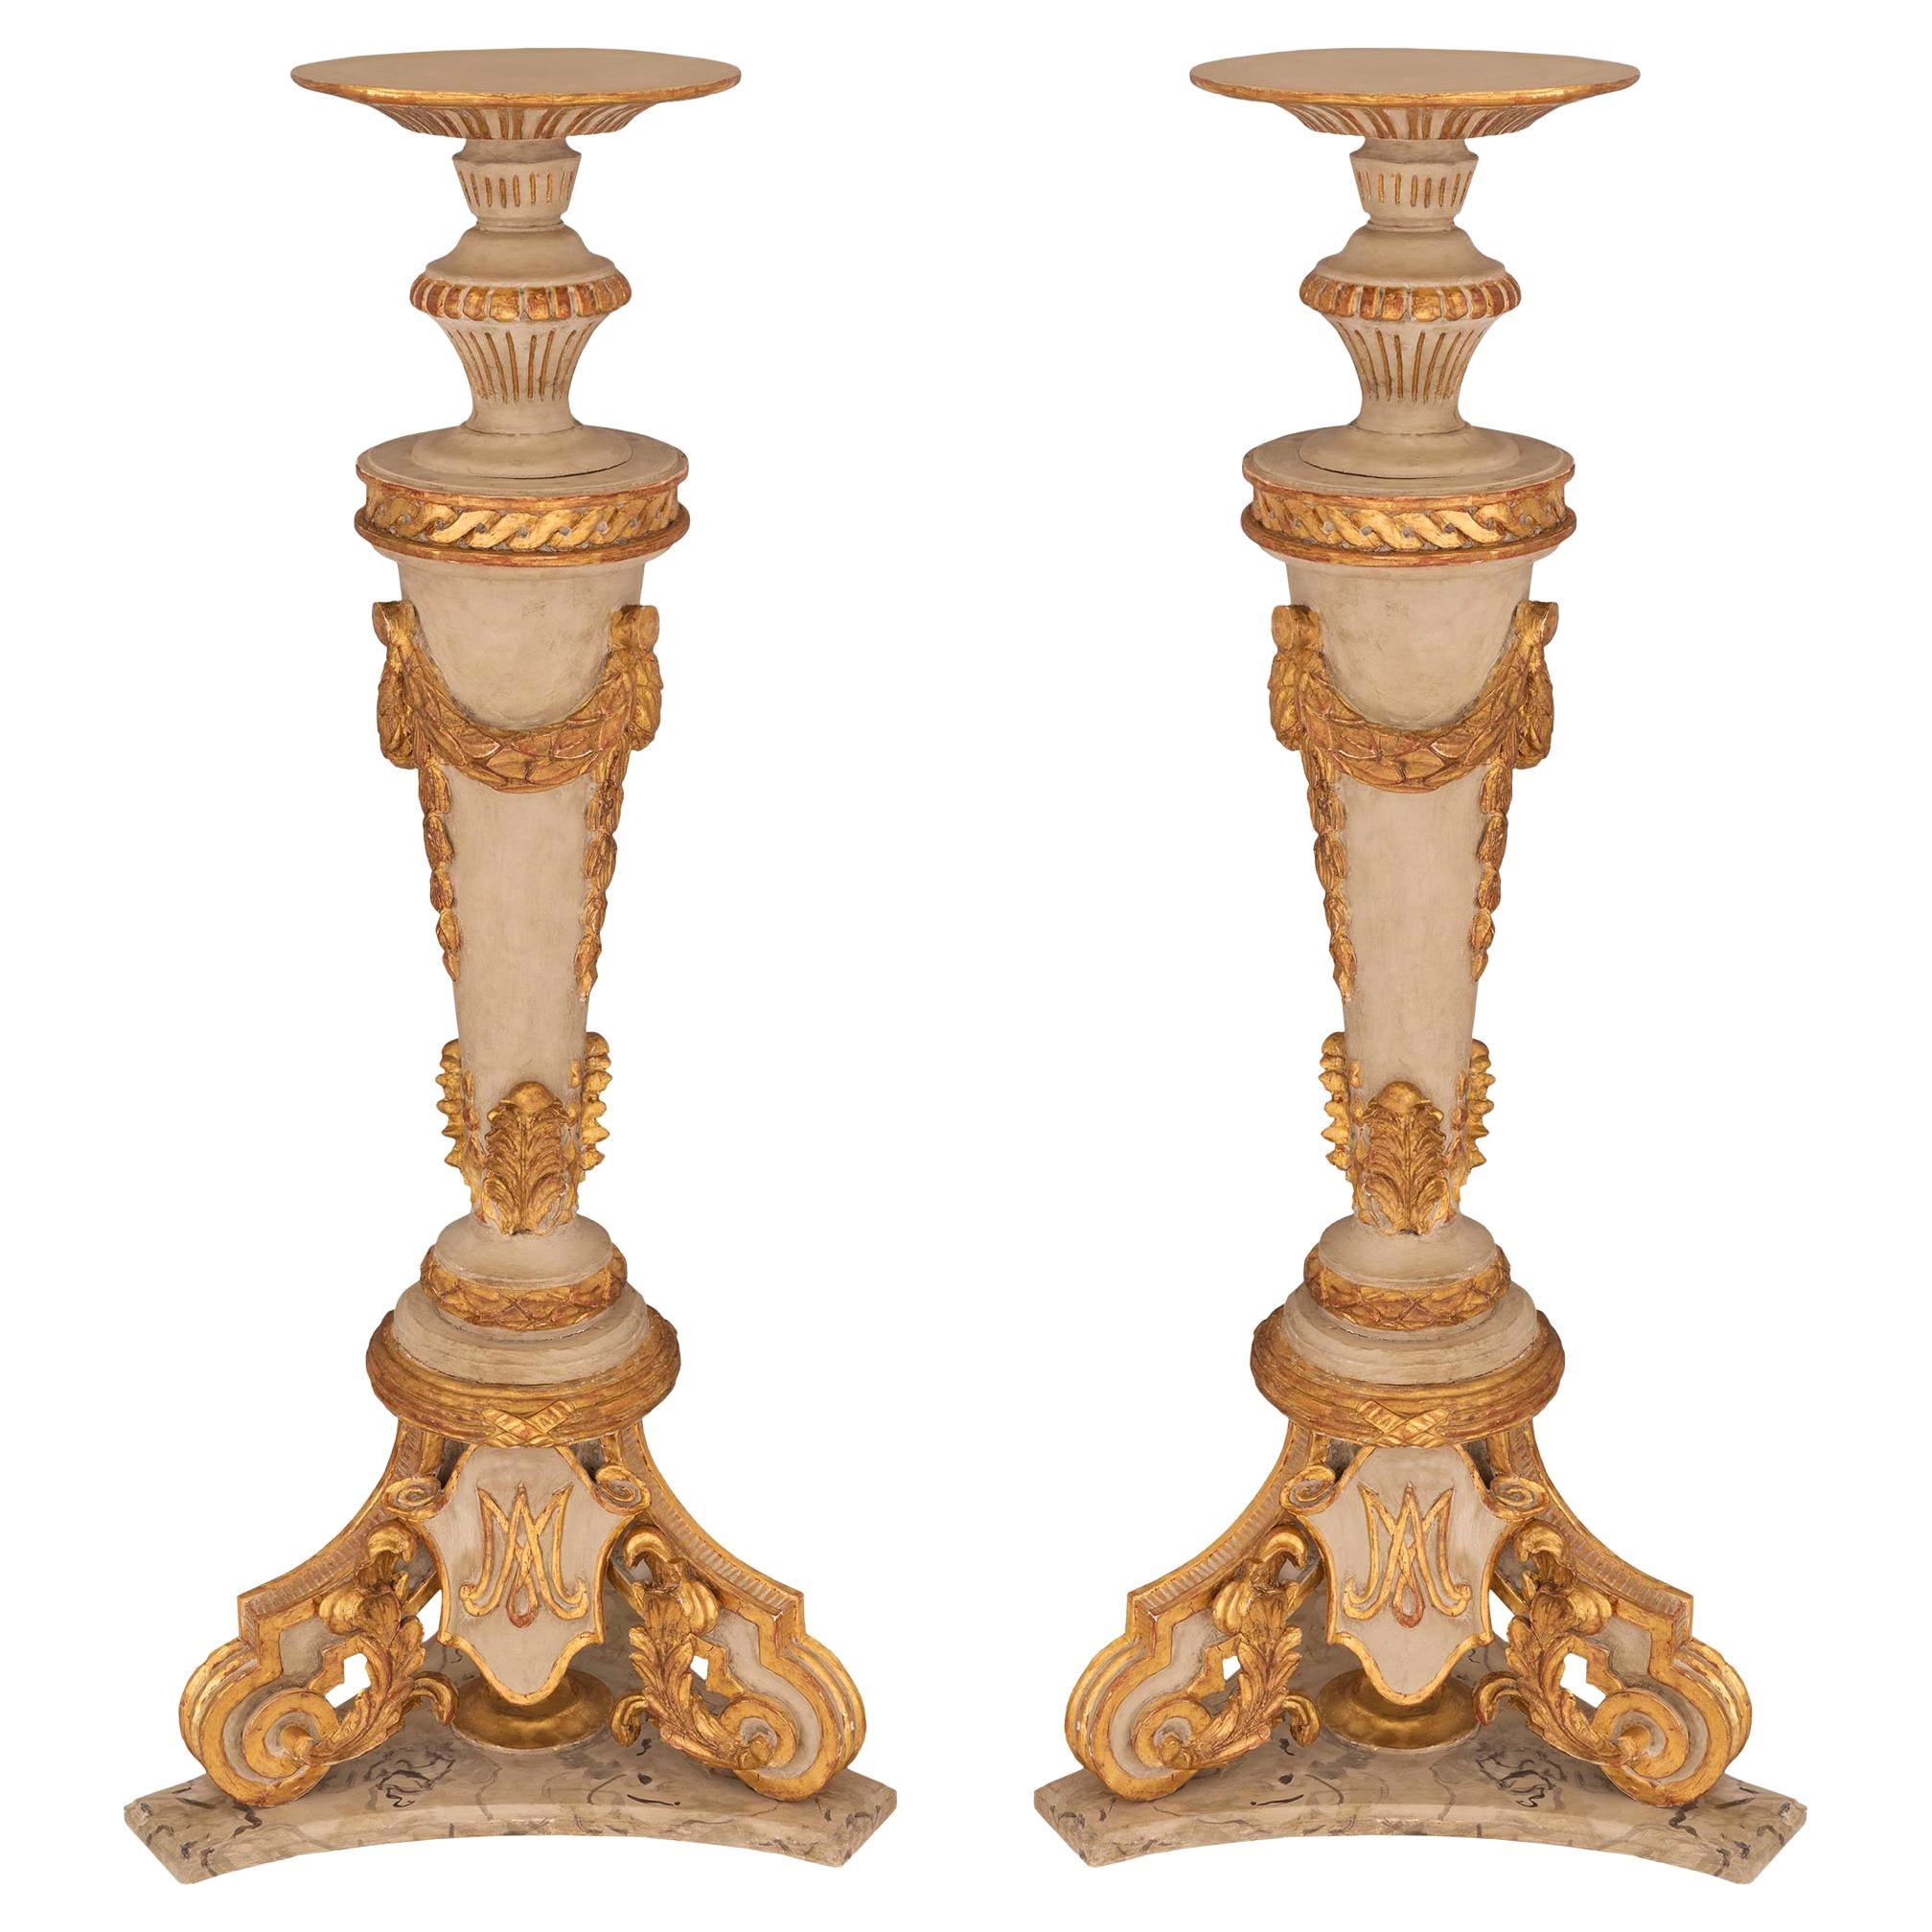 Pair of Italian 18th Century Louis XVI Period Patinated and Gilt Torchieres